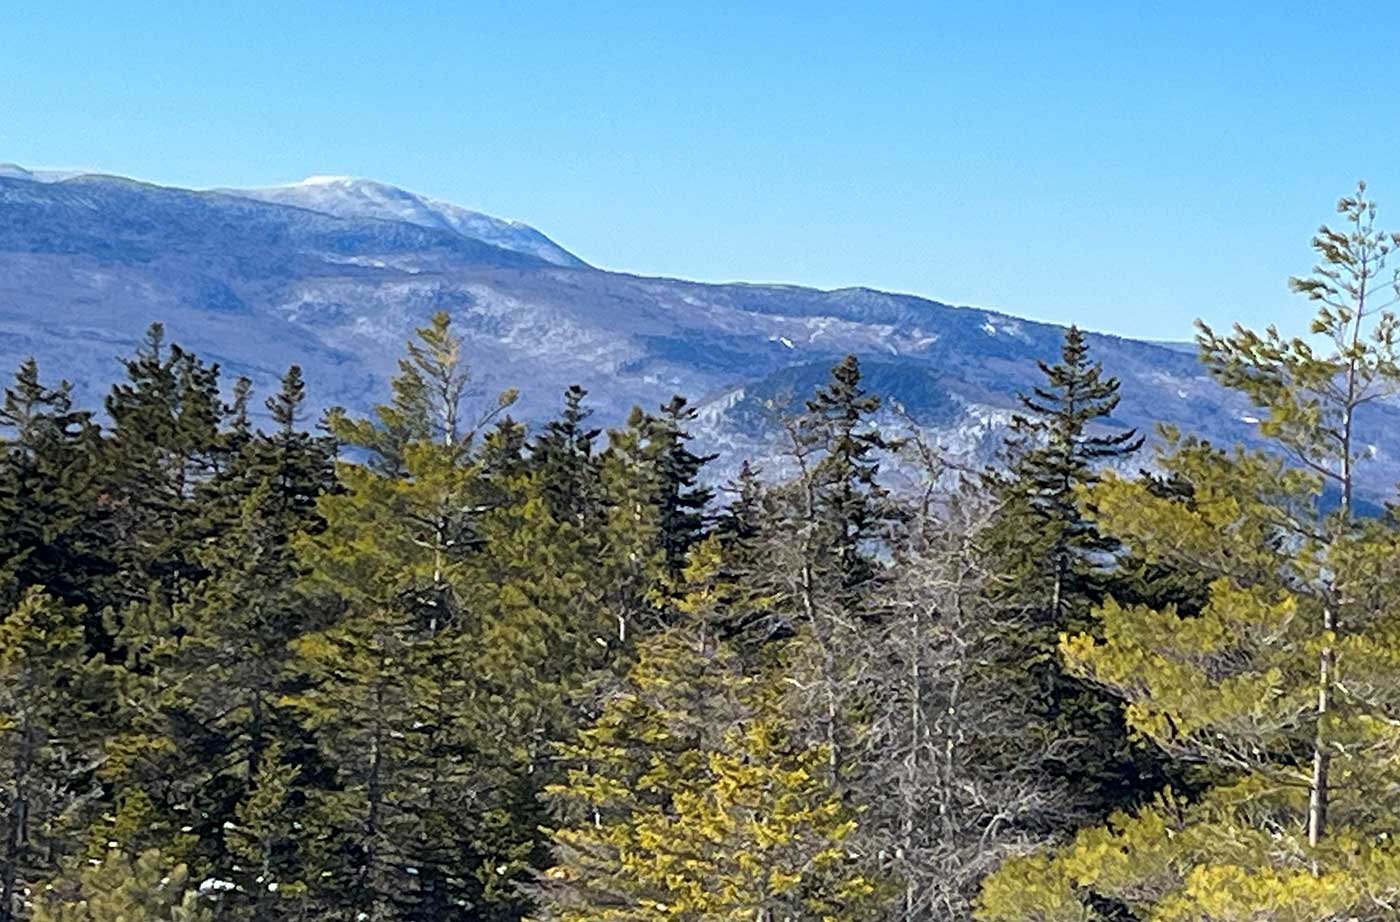 View of mountain over trees and under bright blue sky